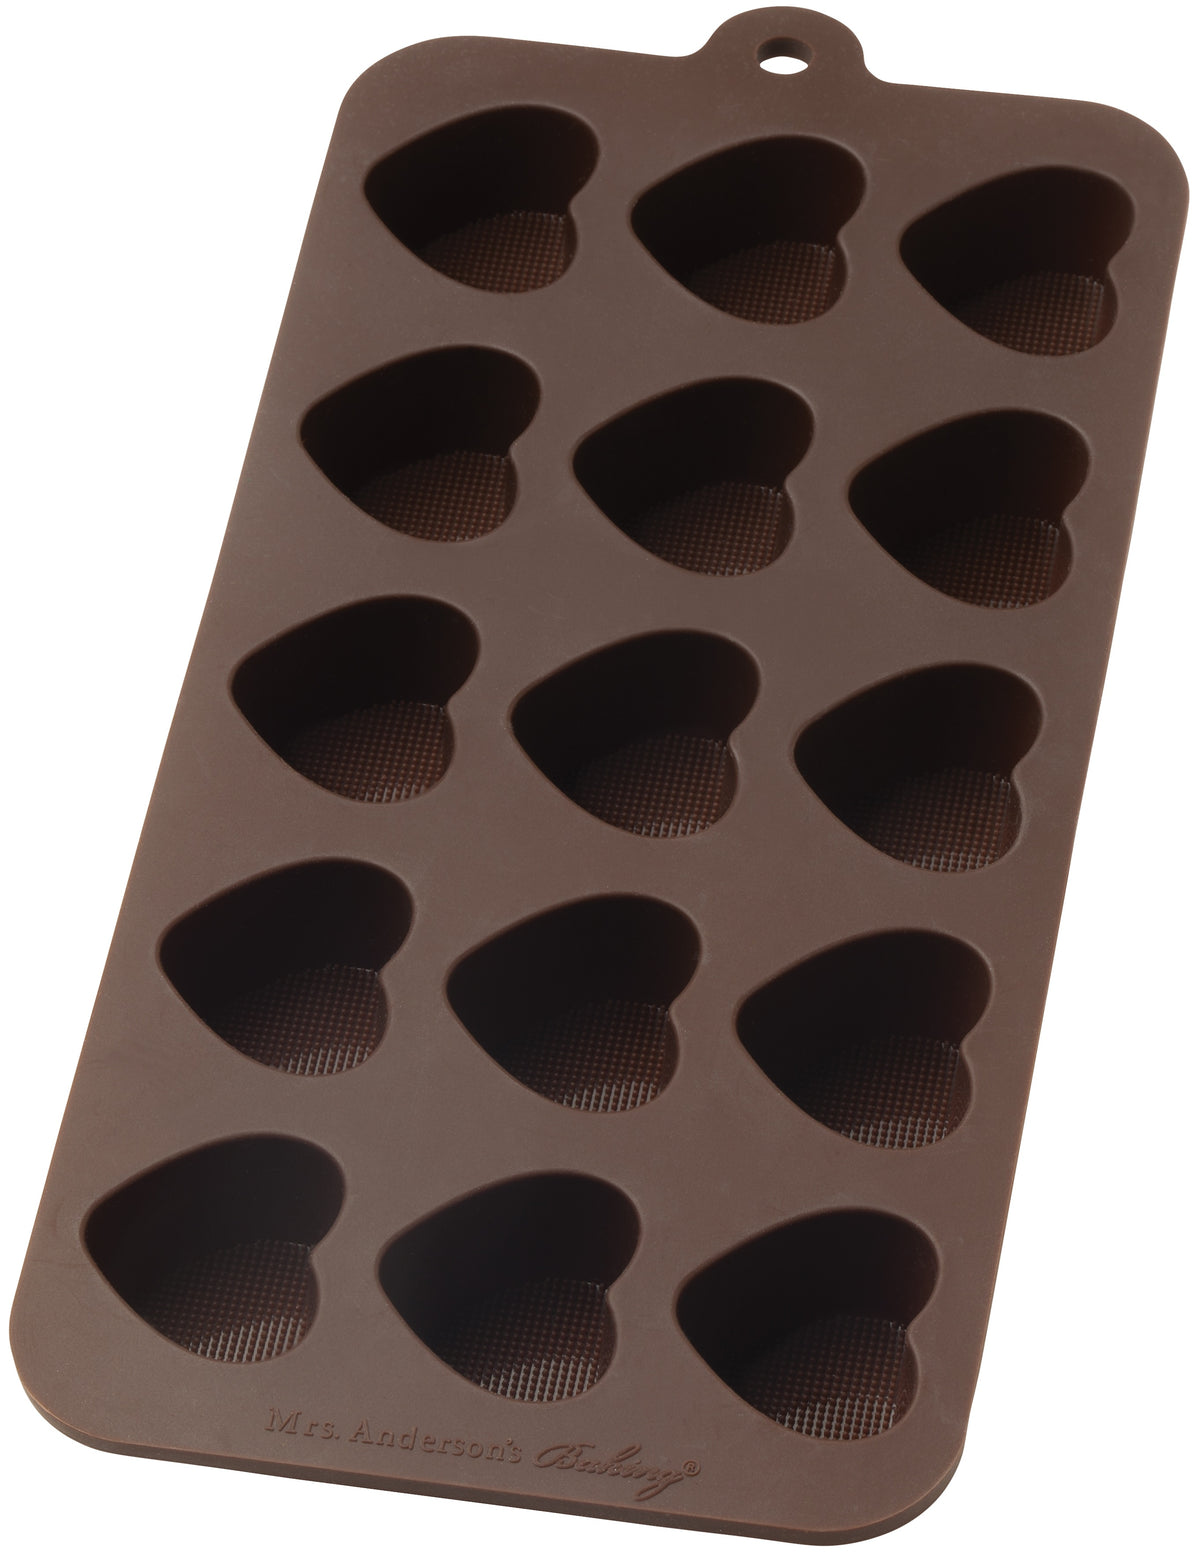 Mrs. Anderson's 43749 Heart Chocolate Mold, Brown